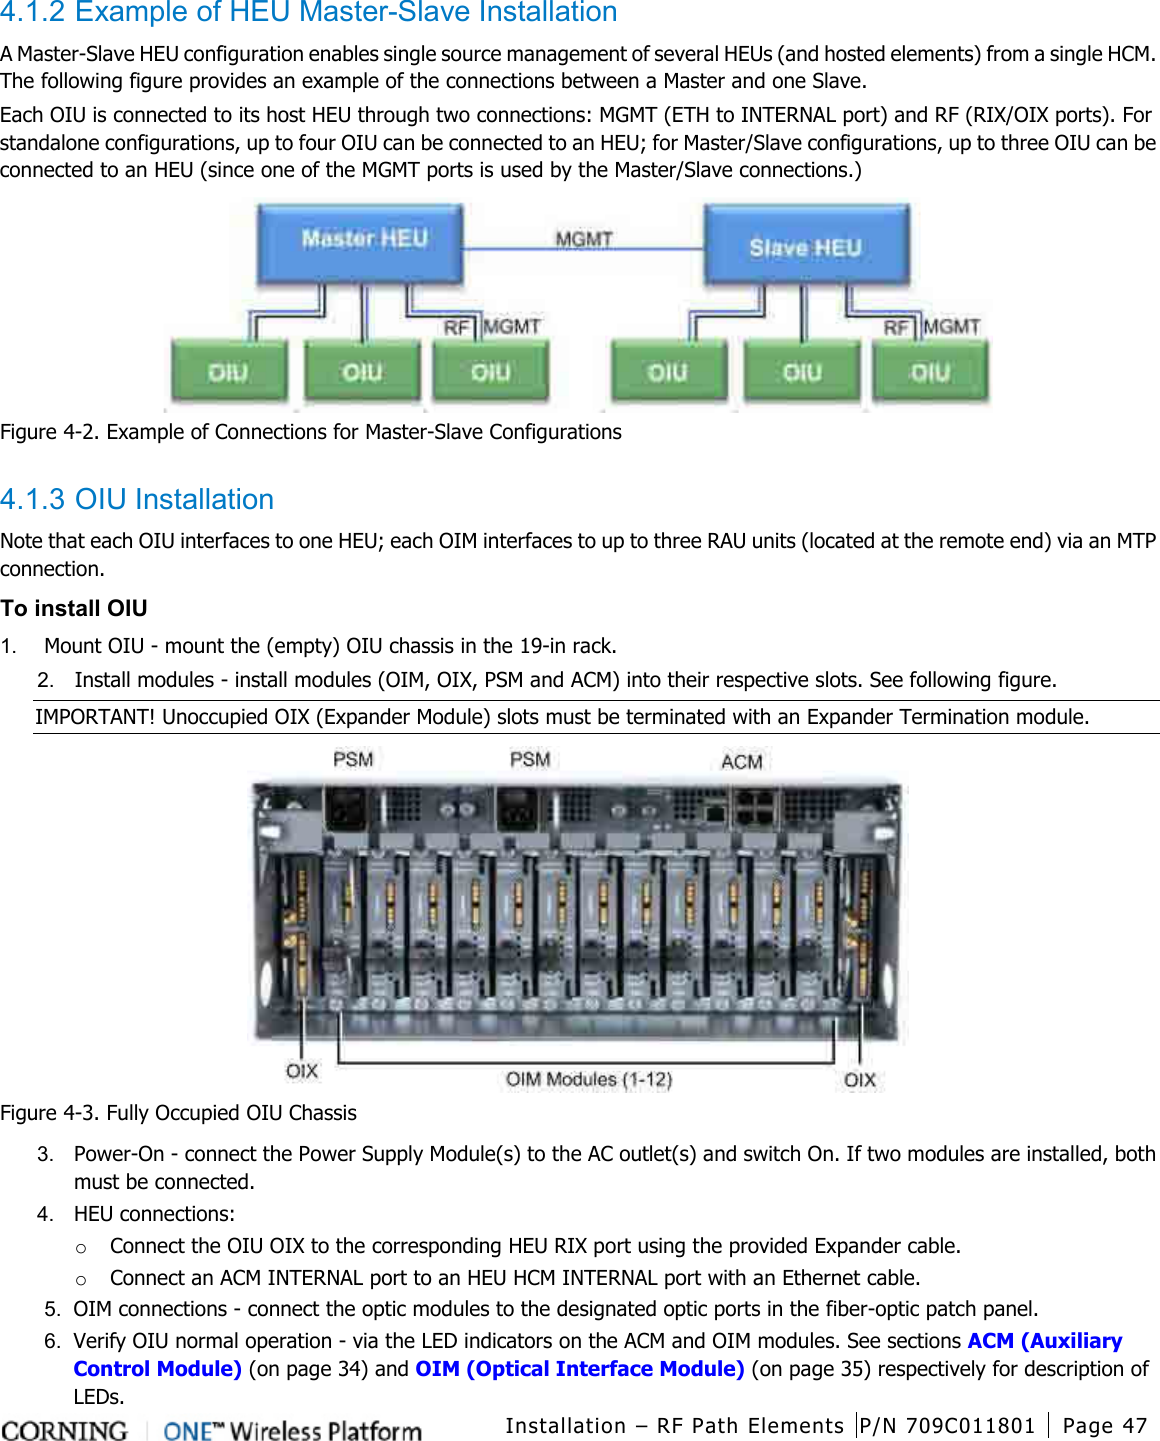  Installation – RF Path Elements P/N 709C011801 Page 47    4.1.2 Example of HEU Master-Slave Installation A Master-Slave HEU configuration enables single source management of several HEUs (and hosted elements) from a single HCM. The following figure provides an example of the connections between a Master and one Slave.   Each OIU is connected to its host HEU through two connections: MGMT (ETH to INTERNAL port) and RF (RIX/OIX ports). For standalone configurations, up to four OIU can be connected to an HEU; for Master/Slave configurations, up to three OIU can be connected to an HEU (since one of the MGMT ports is used by the Master/Slave connections.)  Figure  4-2. Example of Connections for Master-Slave Configurations  4.1.3 OIU Installation Note that each OIU interfaces to one HEU; each OIM interfaces to up to three RAU units (located at the remote end) via an MTP connection. To install OIU 1.  Mount OIU - mount the (empty) OIU chassis in the 19-in rack. 2.  Install modules - install modules (OIM, OIX, PSM and ACM) into their respective slots. See following figure. IMPORTANT! Unoccupied OIX (Expander Module) slots must be terminated with an Expander Termination module.  Figure  4-3. Fully Occupied OIU Chassis 3.  Power-On - connect the Power Supply Module(s) to the AC outlet(s) and switch On. If two modules are installed, both must be connected. 4.  HEU connections: o Connect the OIU OIX to the corresponding HEU RIX port using the provided Expander cable. o Connect an ACM INTERNAL port to an HEU HCM INTERNAL port with an Ethernet cable. 5.  OIM connections - connect the optic modules to the designated optic ports in the fiber-optic patch panel.   6.  Verify OIU normal operation - via the LED indicators on the ACM and OIM modules. See sections ACM (Auxiliary Control Module) (on page 34) and OIM (Optical Interface Module) (on page 35) respectively for description of LEDs. 